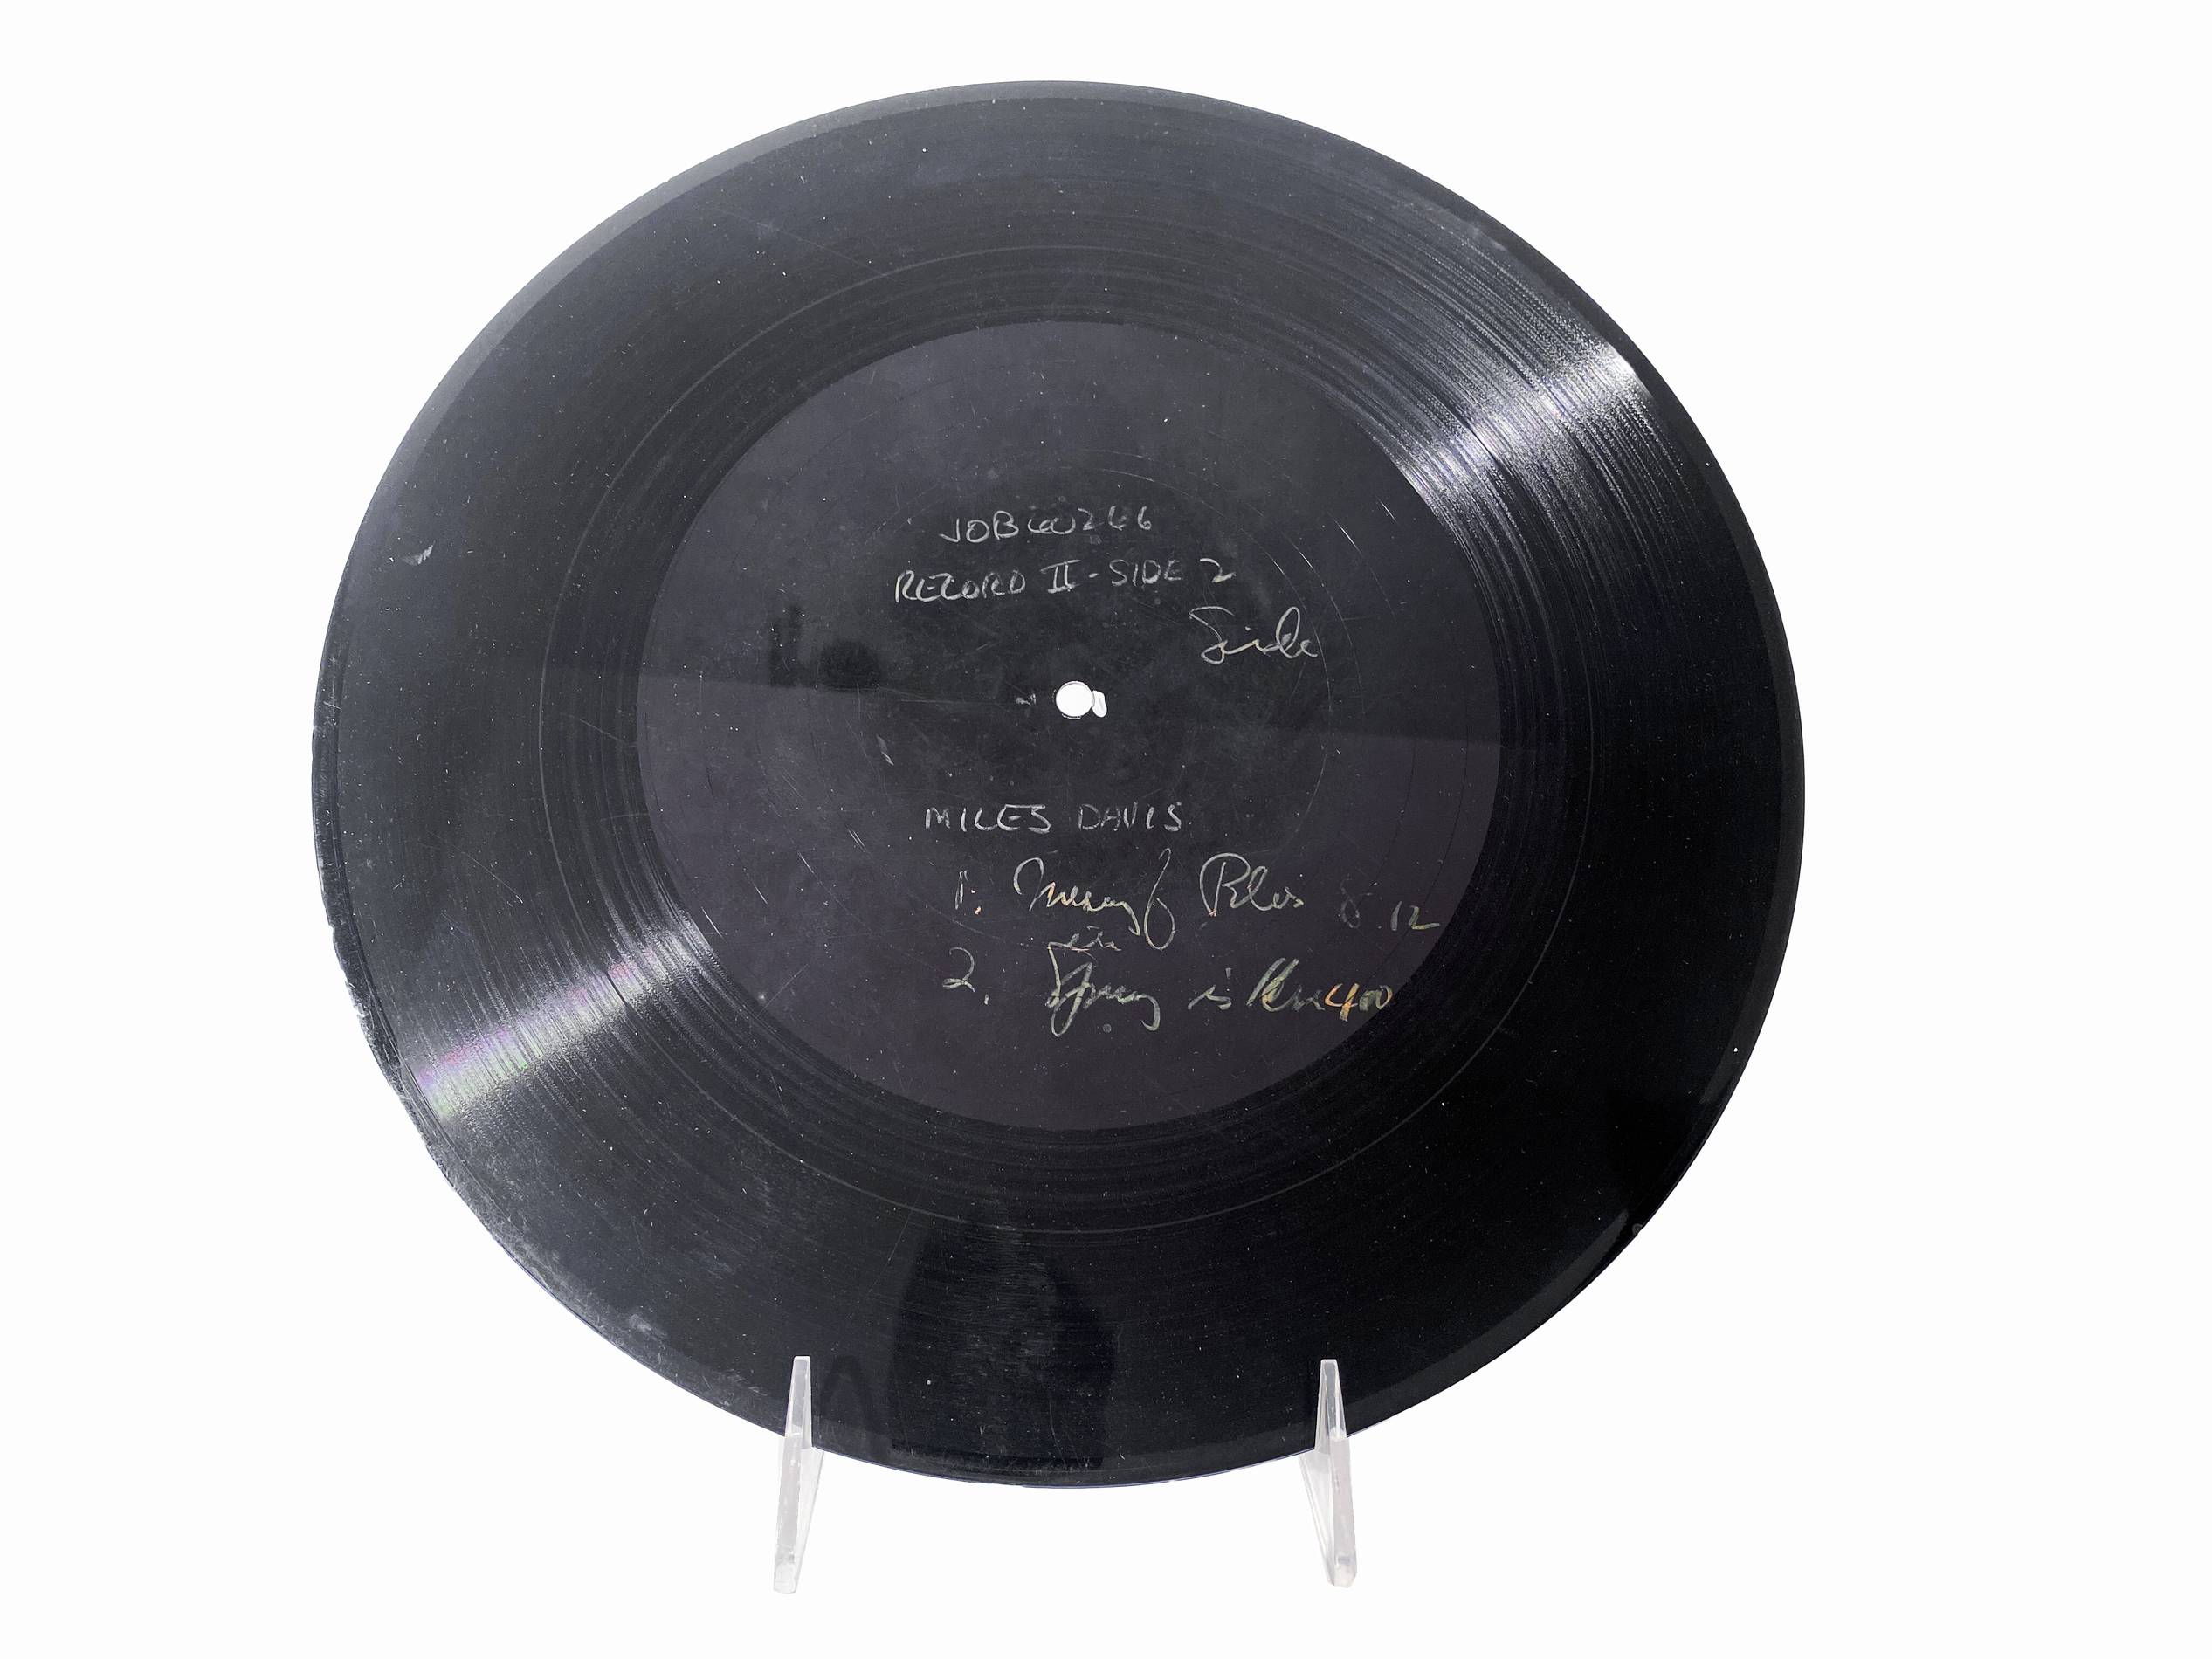 The only known test pressing of Miles Davis playing “Meaning of the Blues” at Carnegie Hall